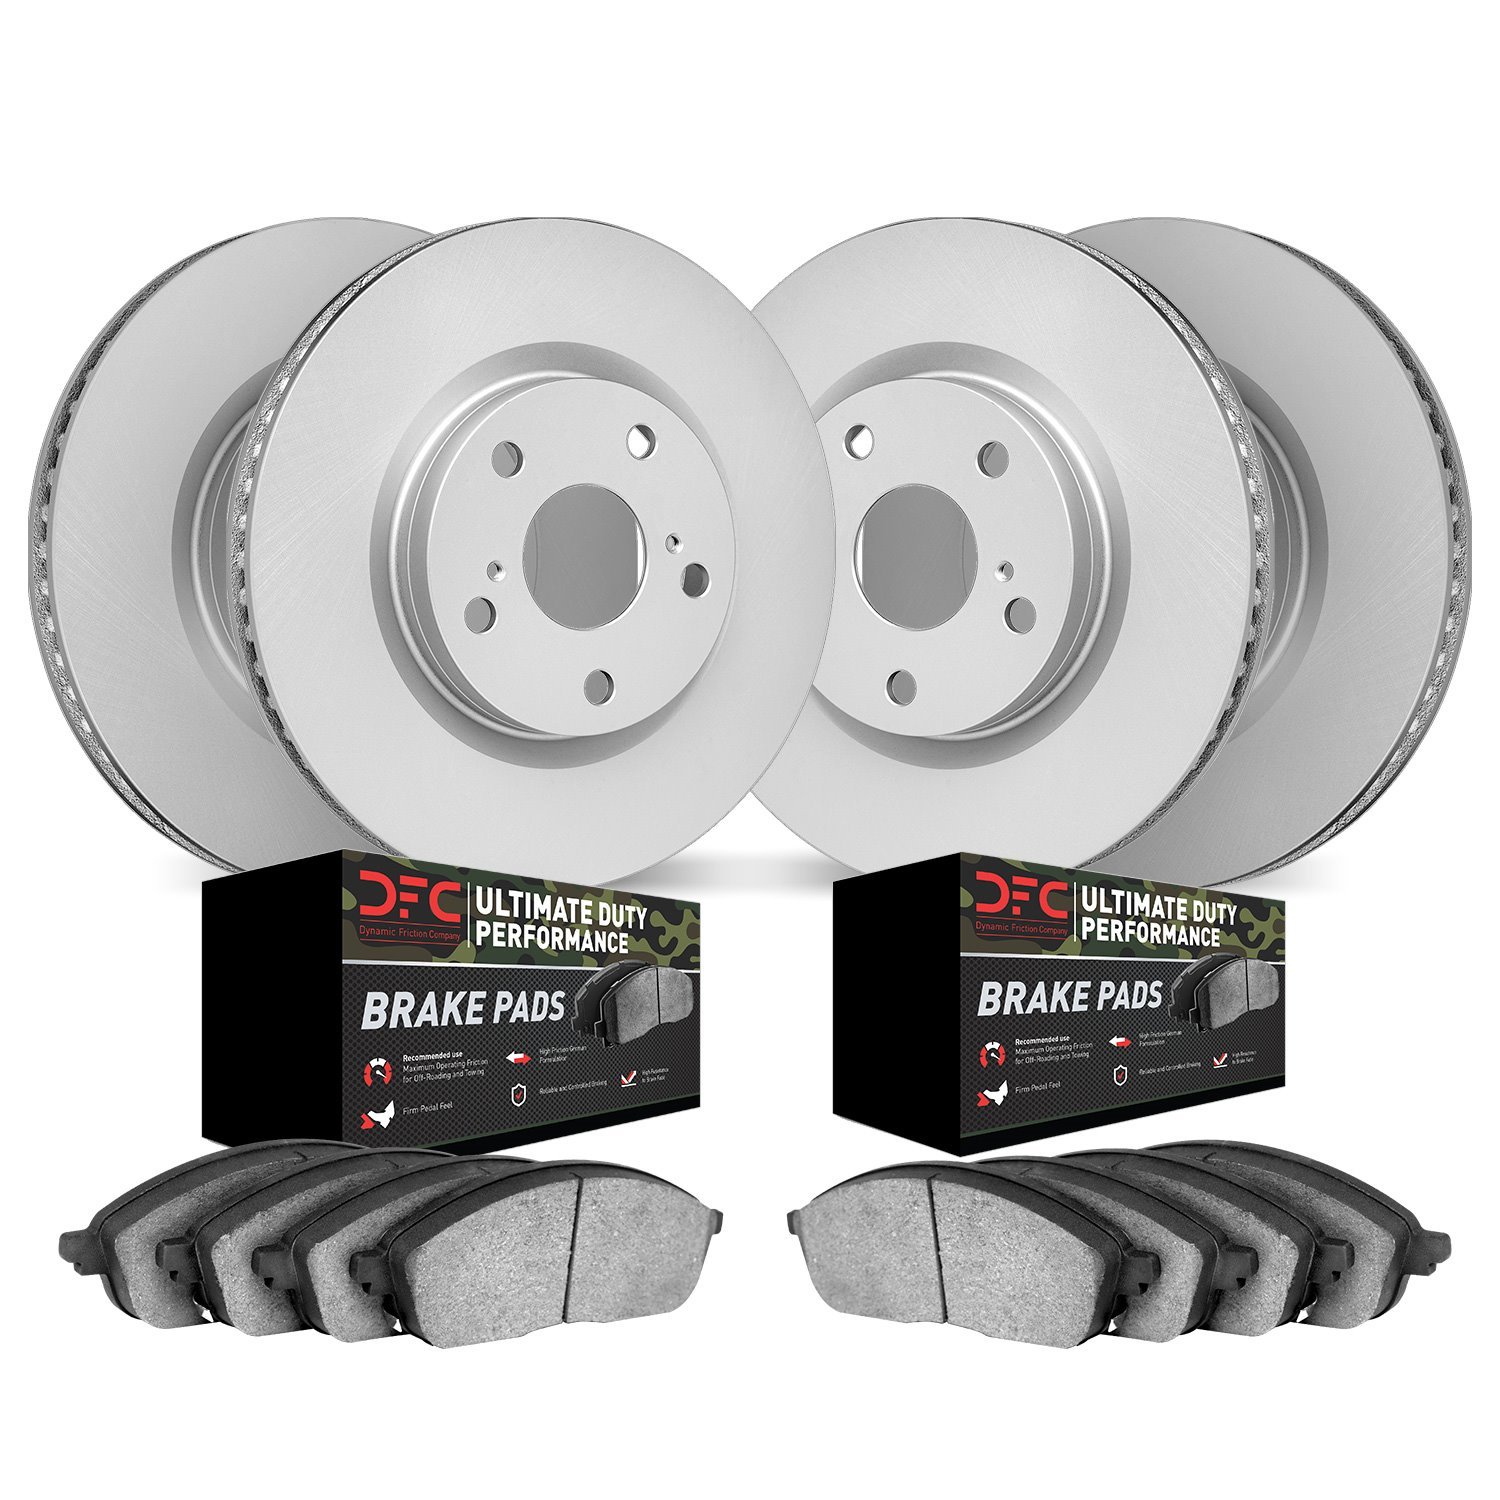 4404-39001 Geospec Brake Rotors with Ultimate-Duty Brake Pads Kit, Fits Select Mopar, Position: Front and Rear